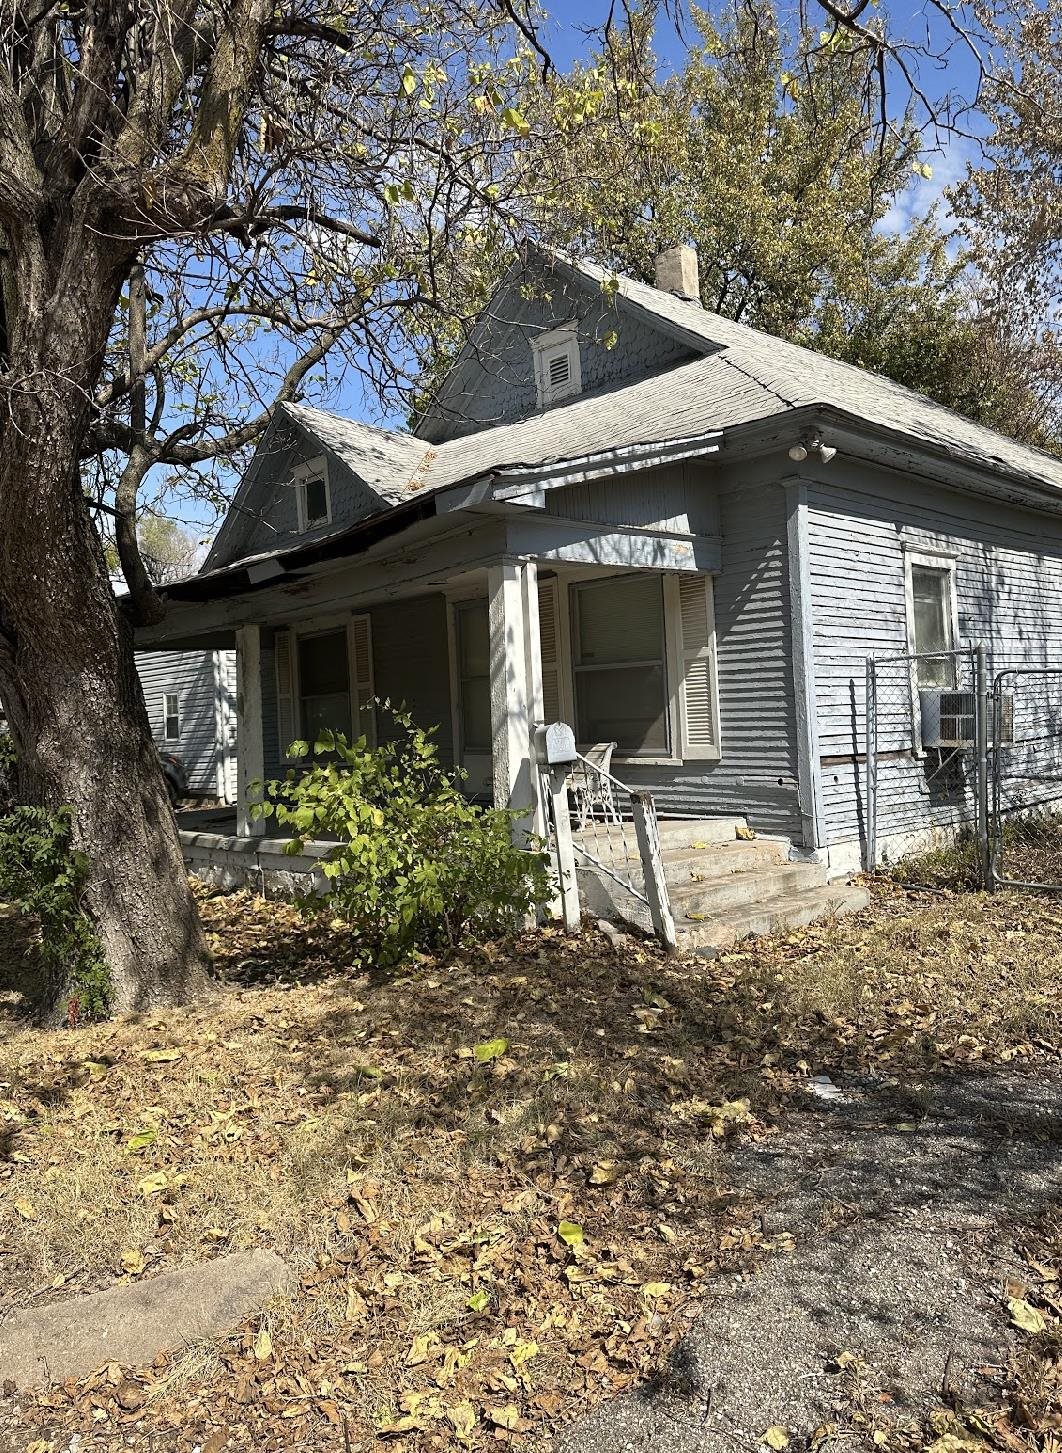 Investor special!! This 3 bedroom, 1 bathroom would make a fantastic rental! Tons of opportunity! St